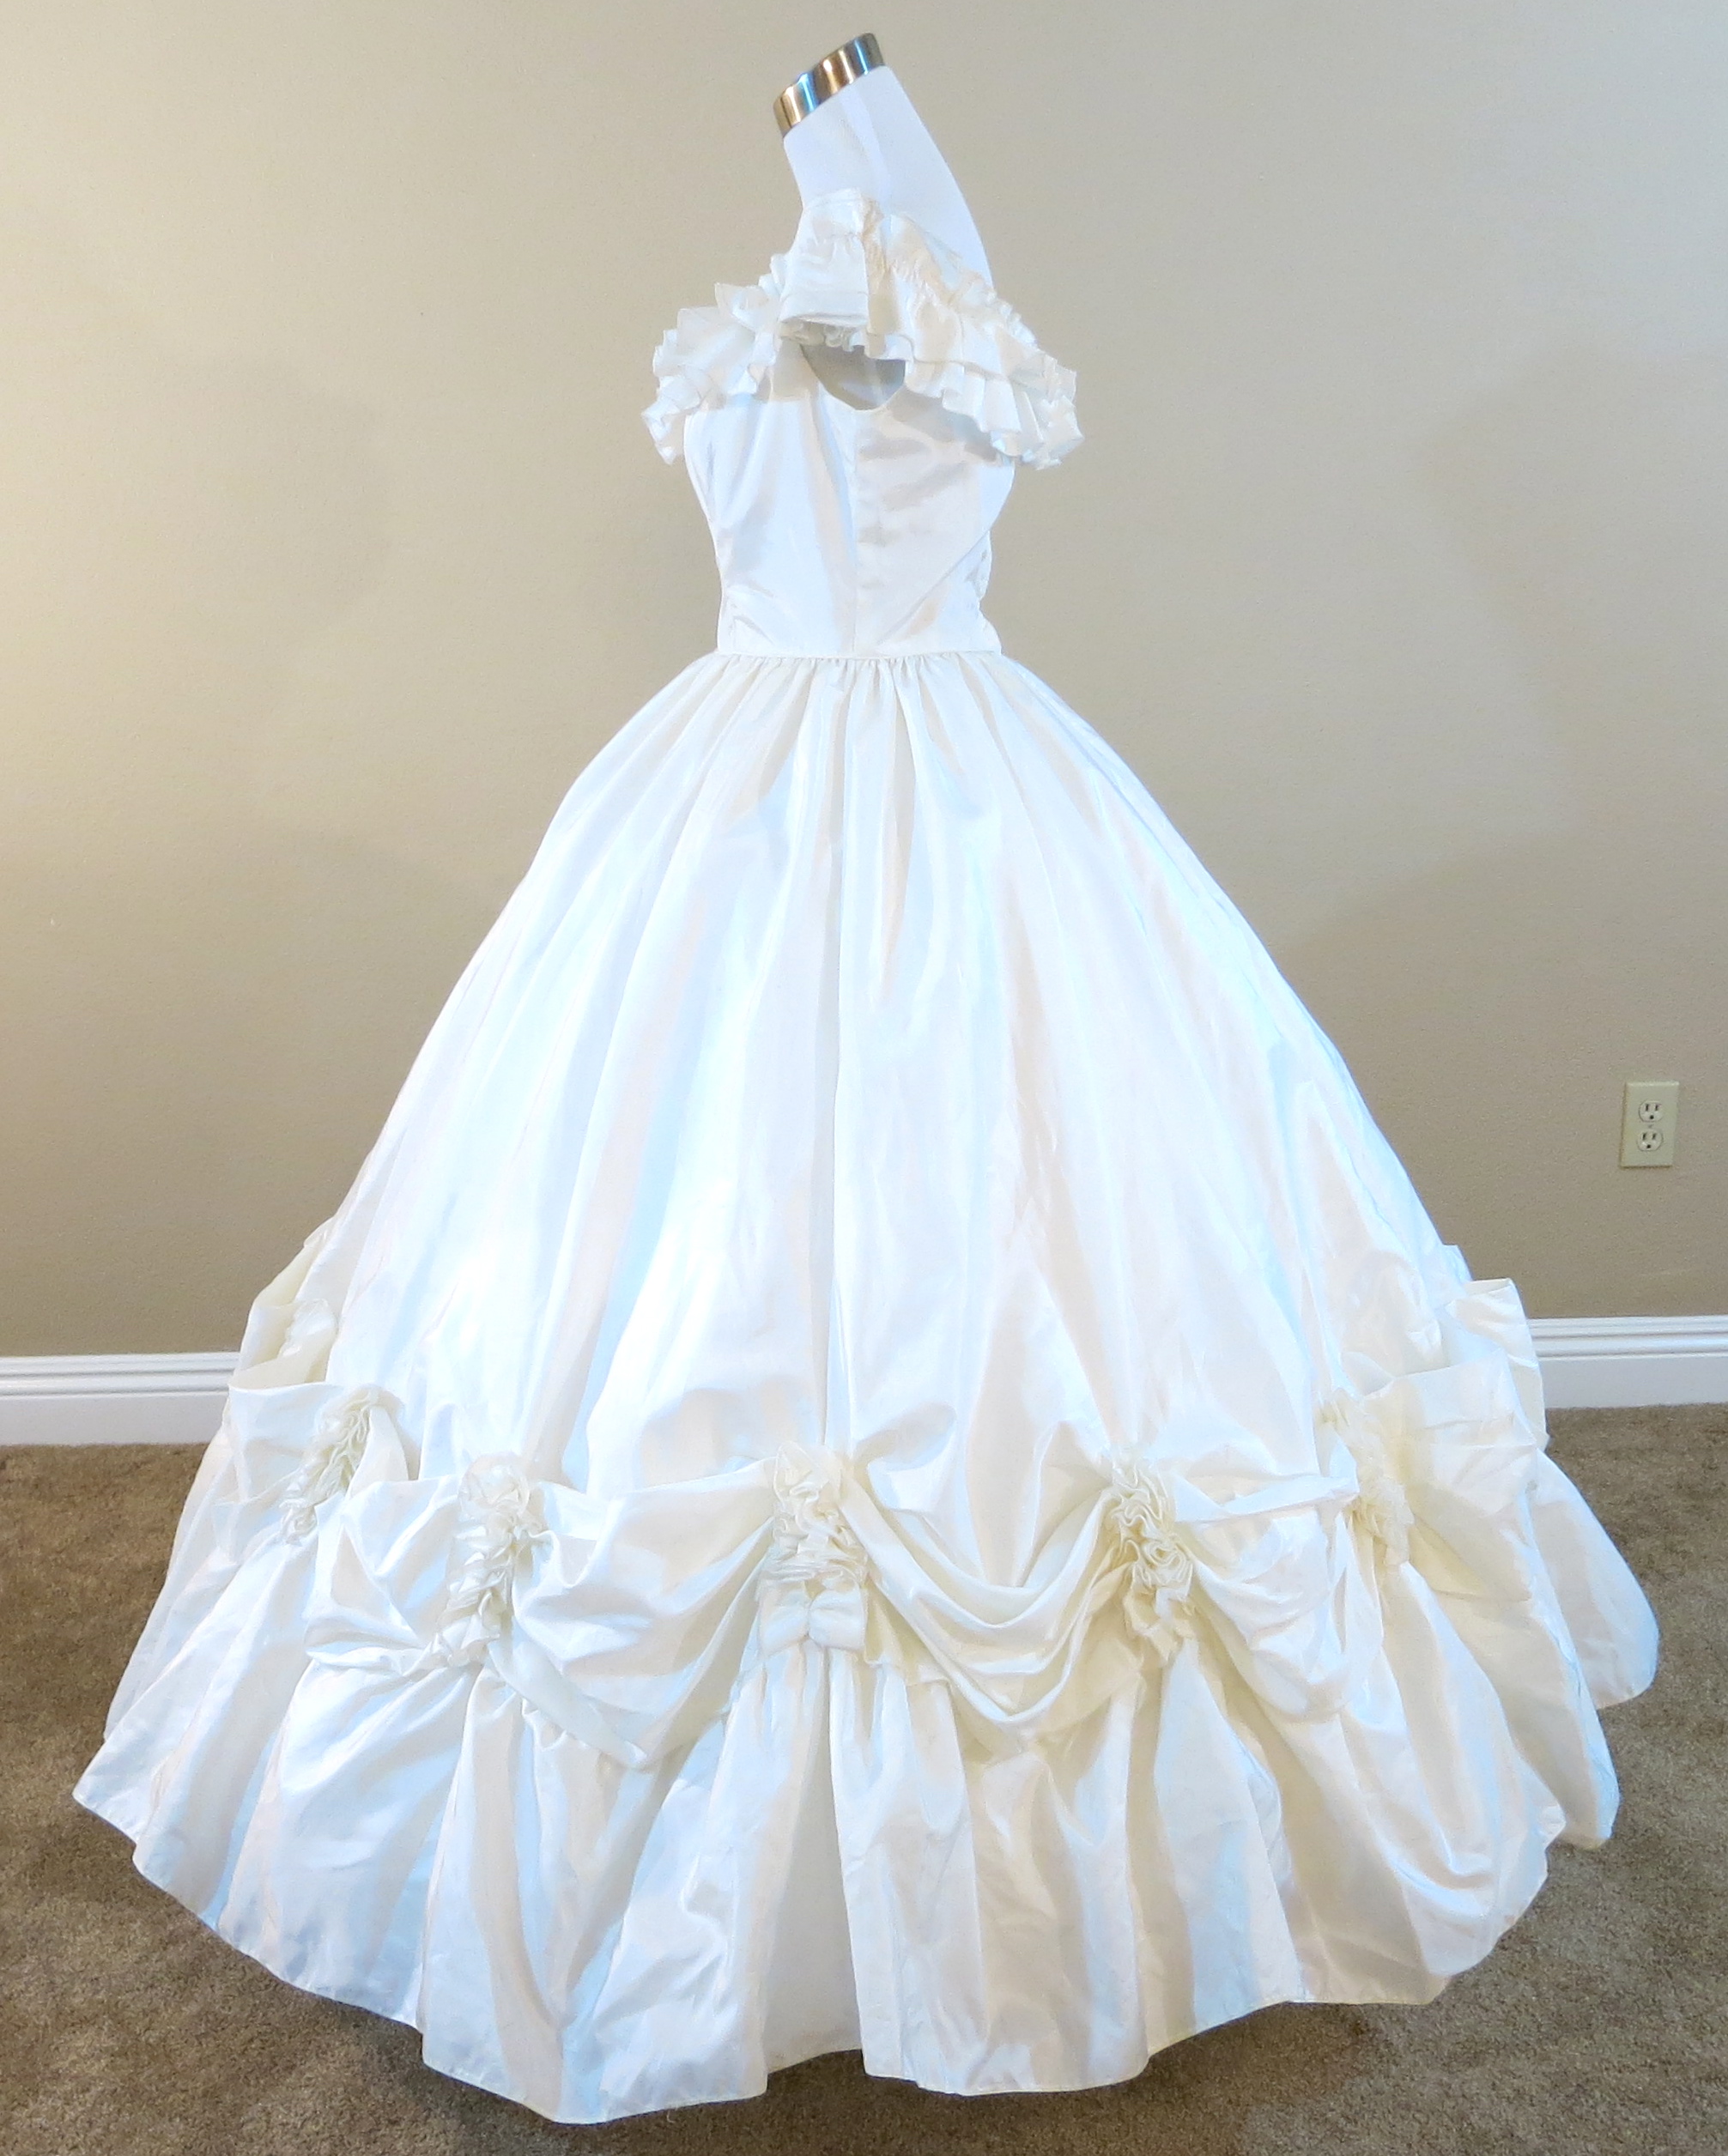 Off-White Ball Gown — Civil War Ball Gowns & Costume